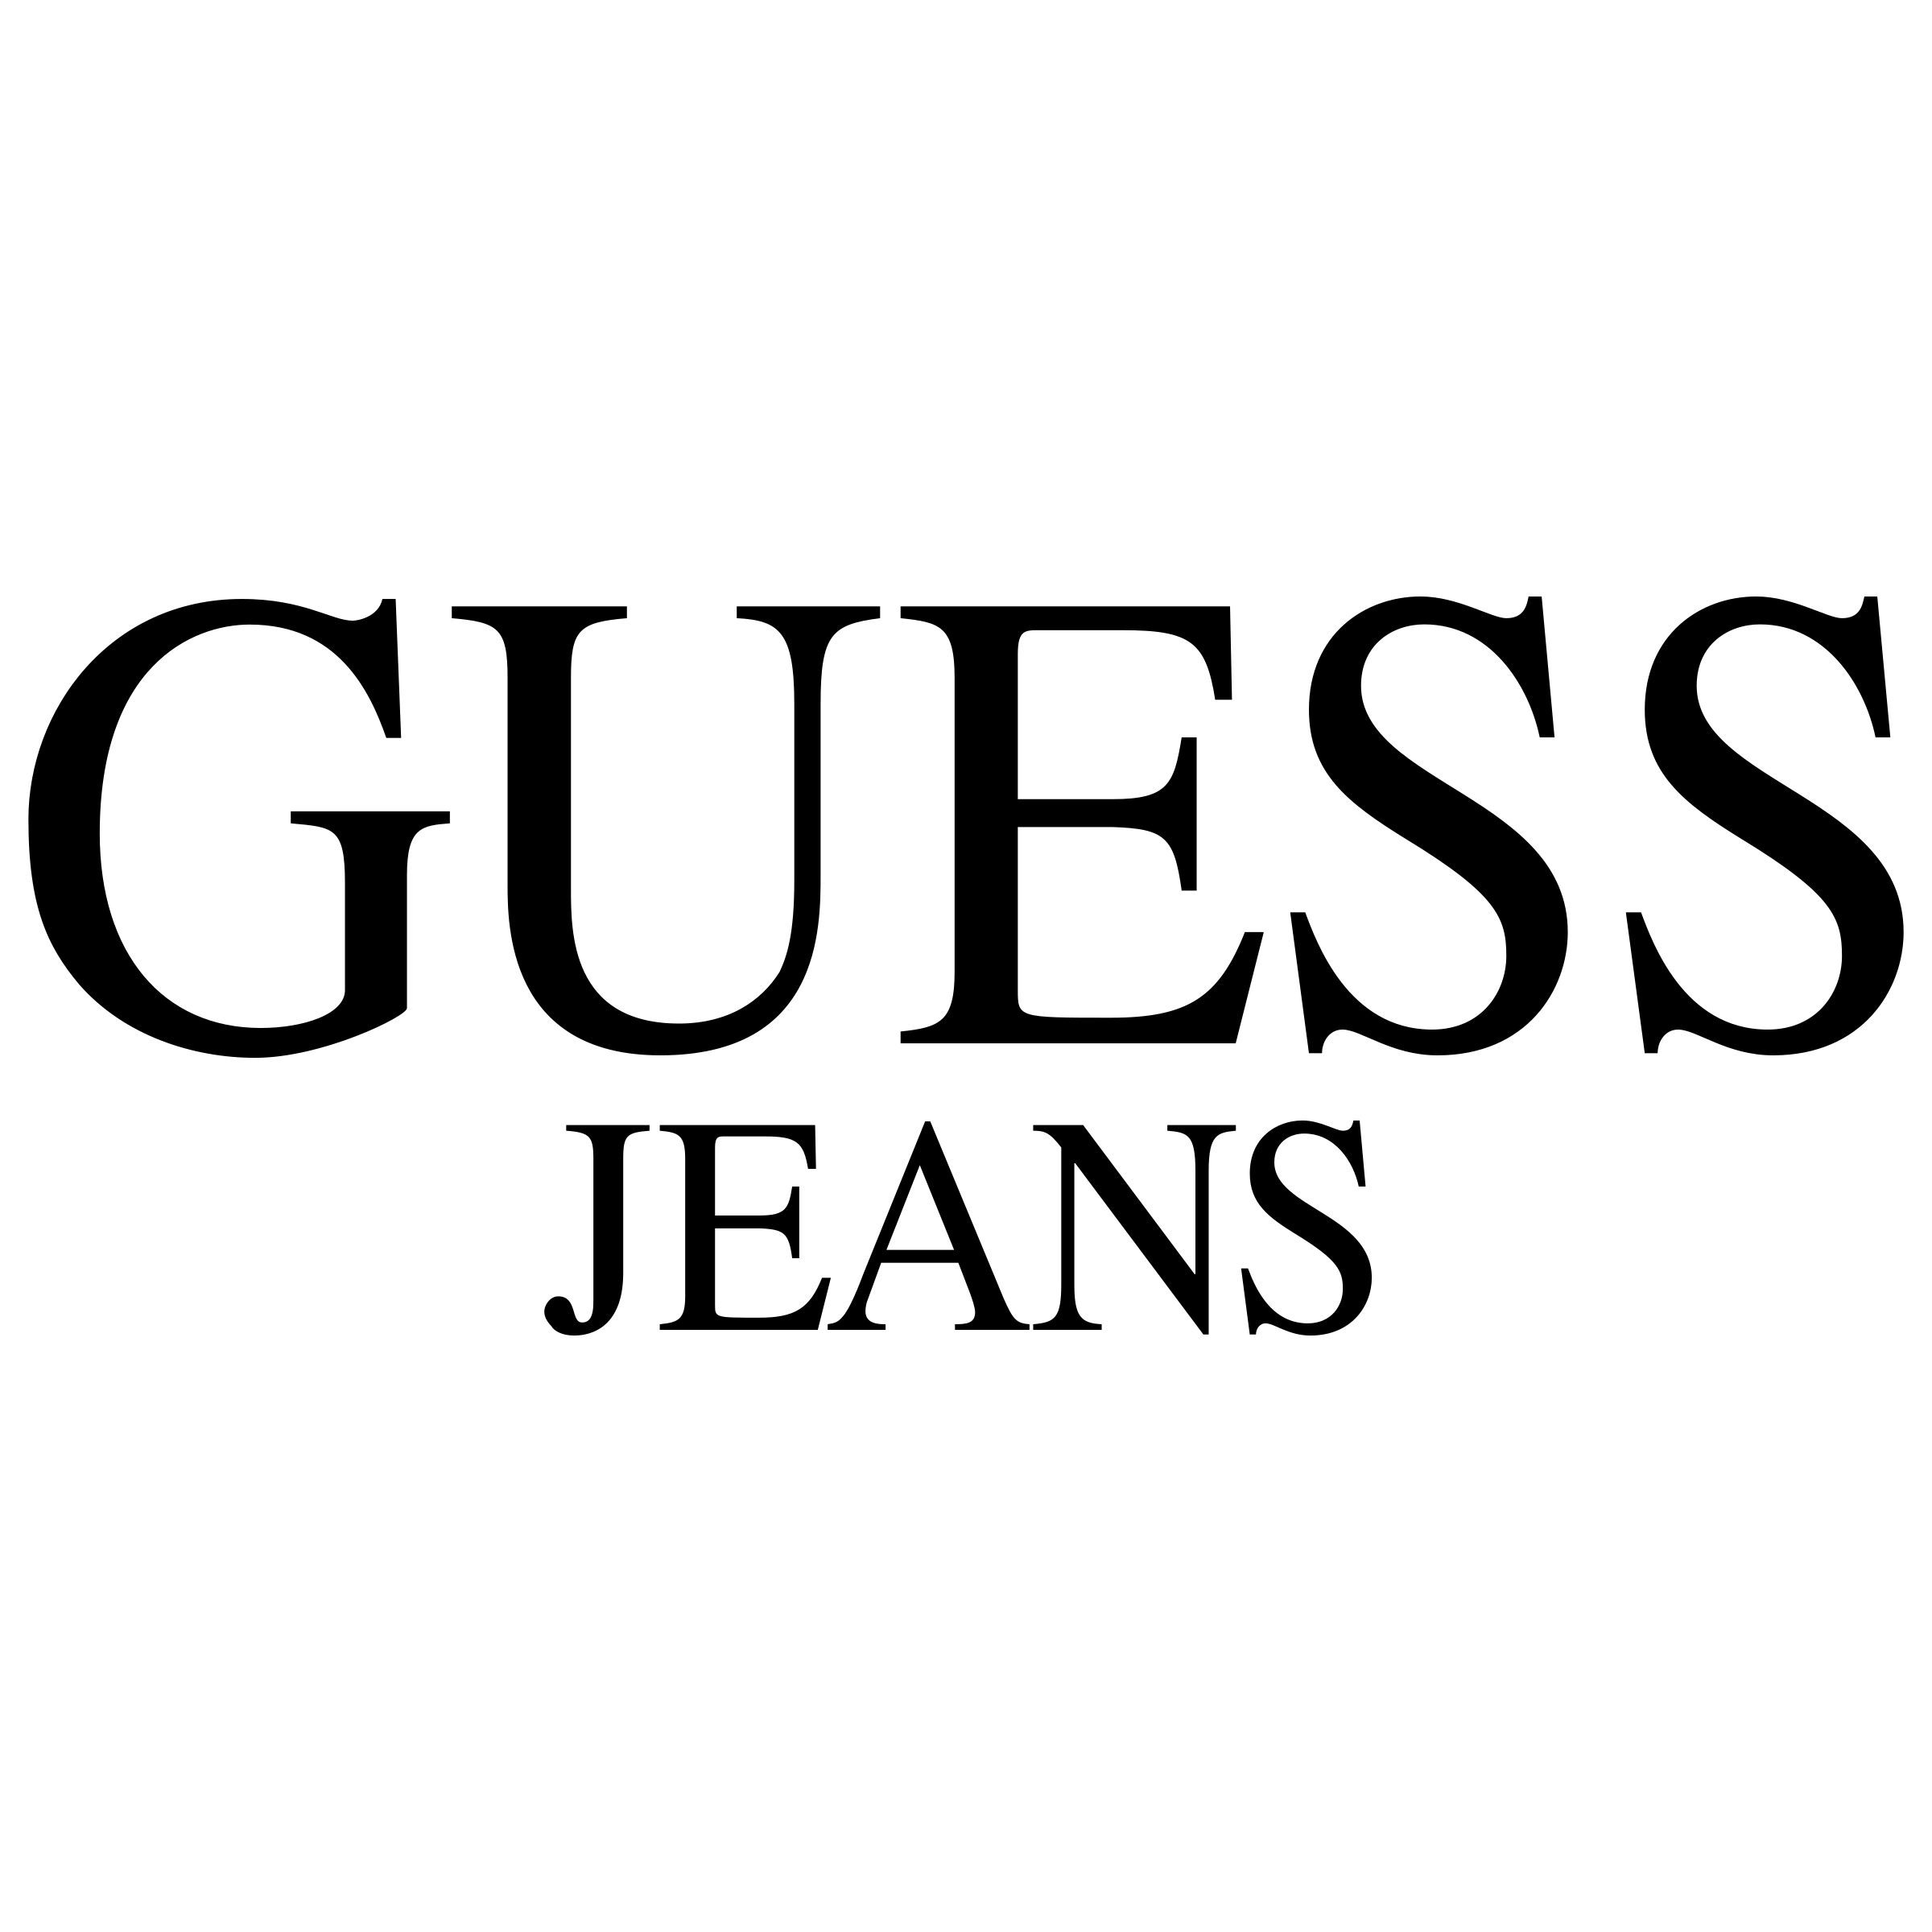 Jeans Logo - Guess Jeans Logo PNG Transparent & SVG Vector - Freebie Supply